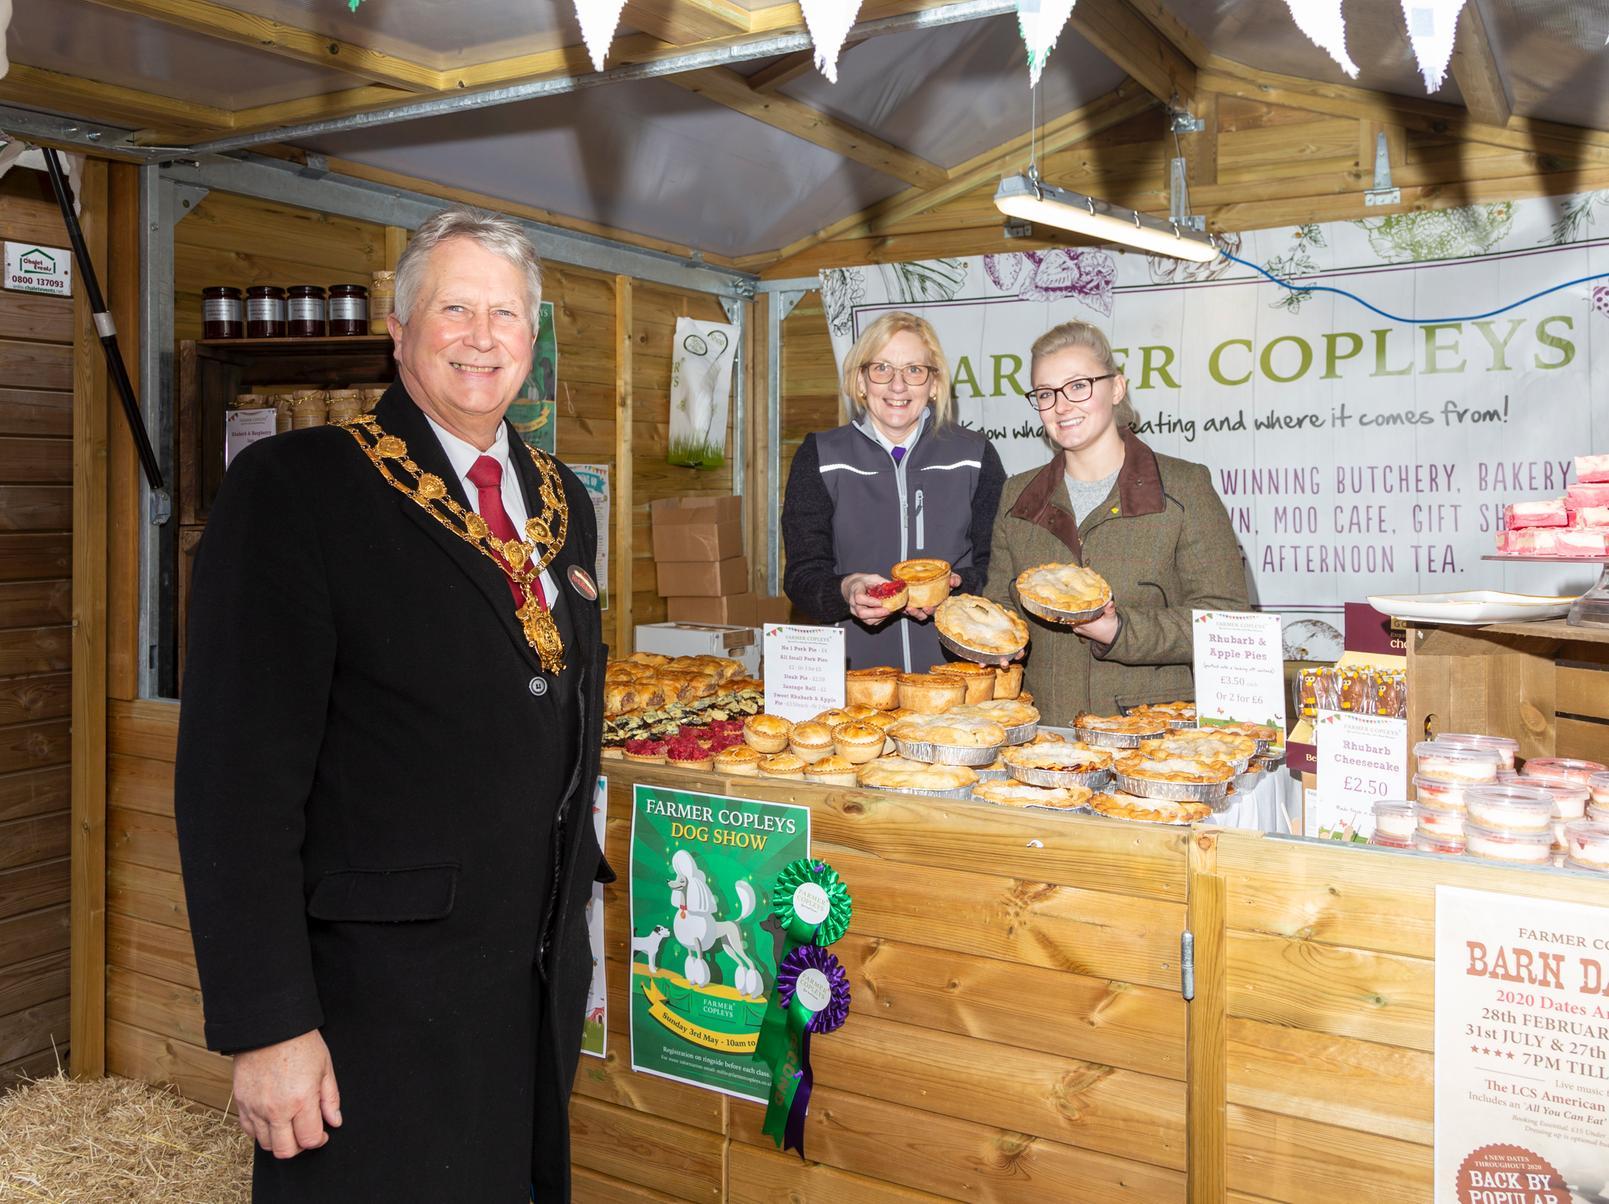 The Mayor poses with our district's very own Farmer Copley's farm shop